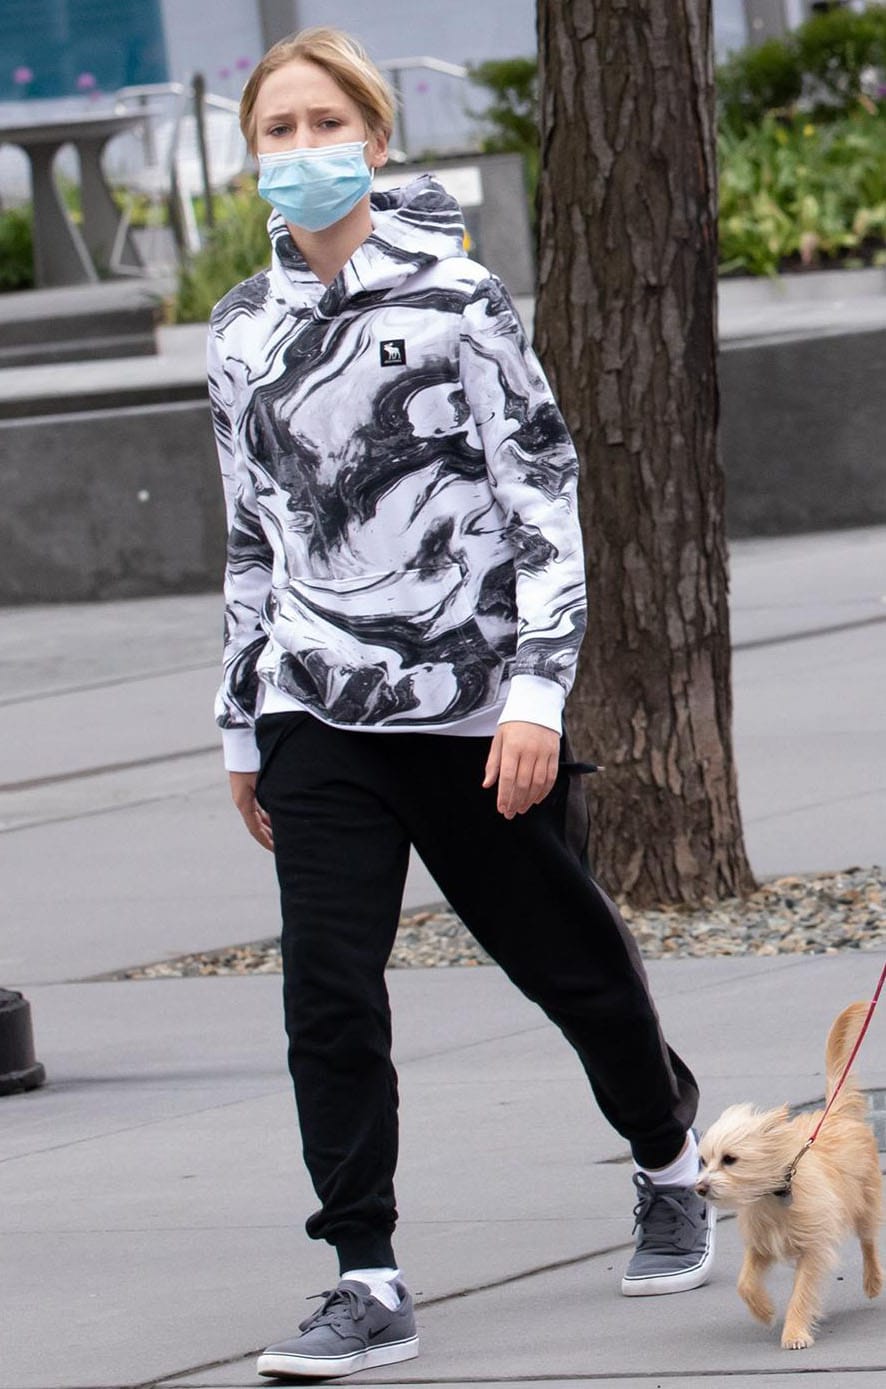 Naomi Watts' eldest son Alexander keeps it cool with a swirl-print hoodie and jogger pants